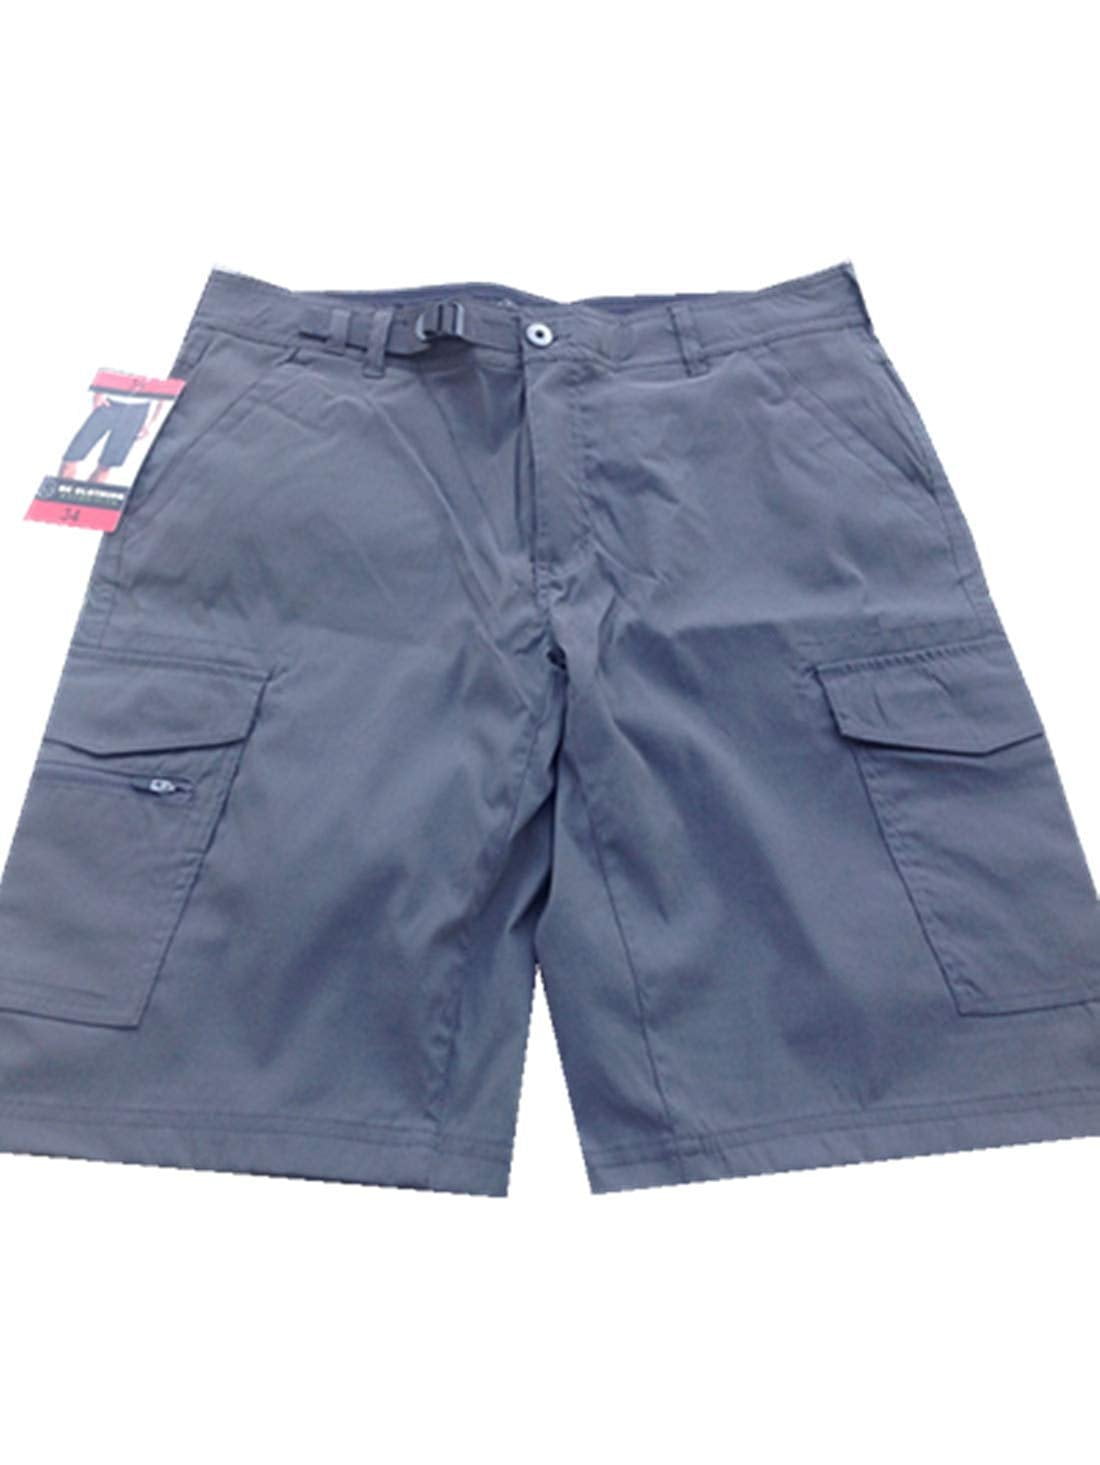 BC Clothing Men's Expedition Stretch Cargo Shorts, Variety (32, Grey ...